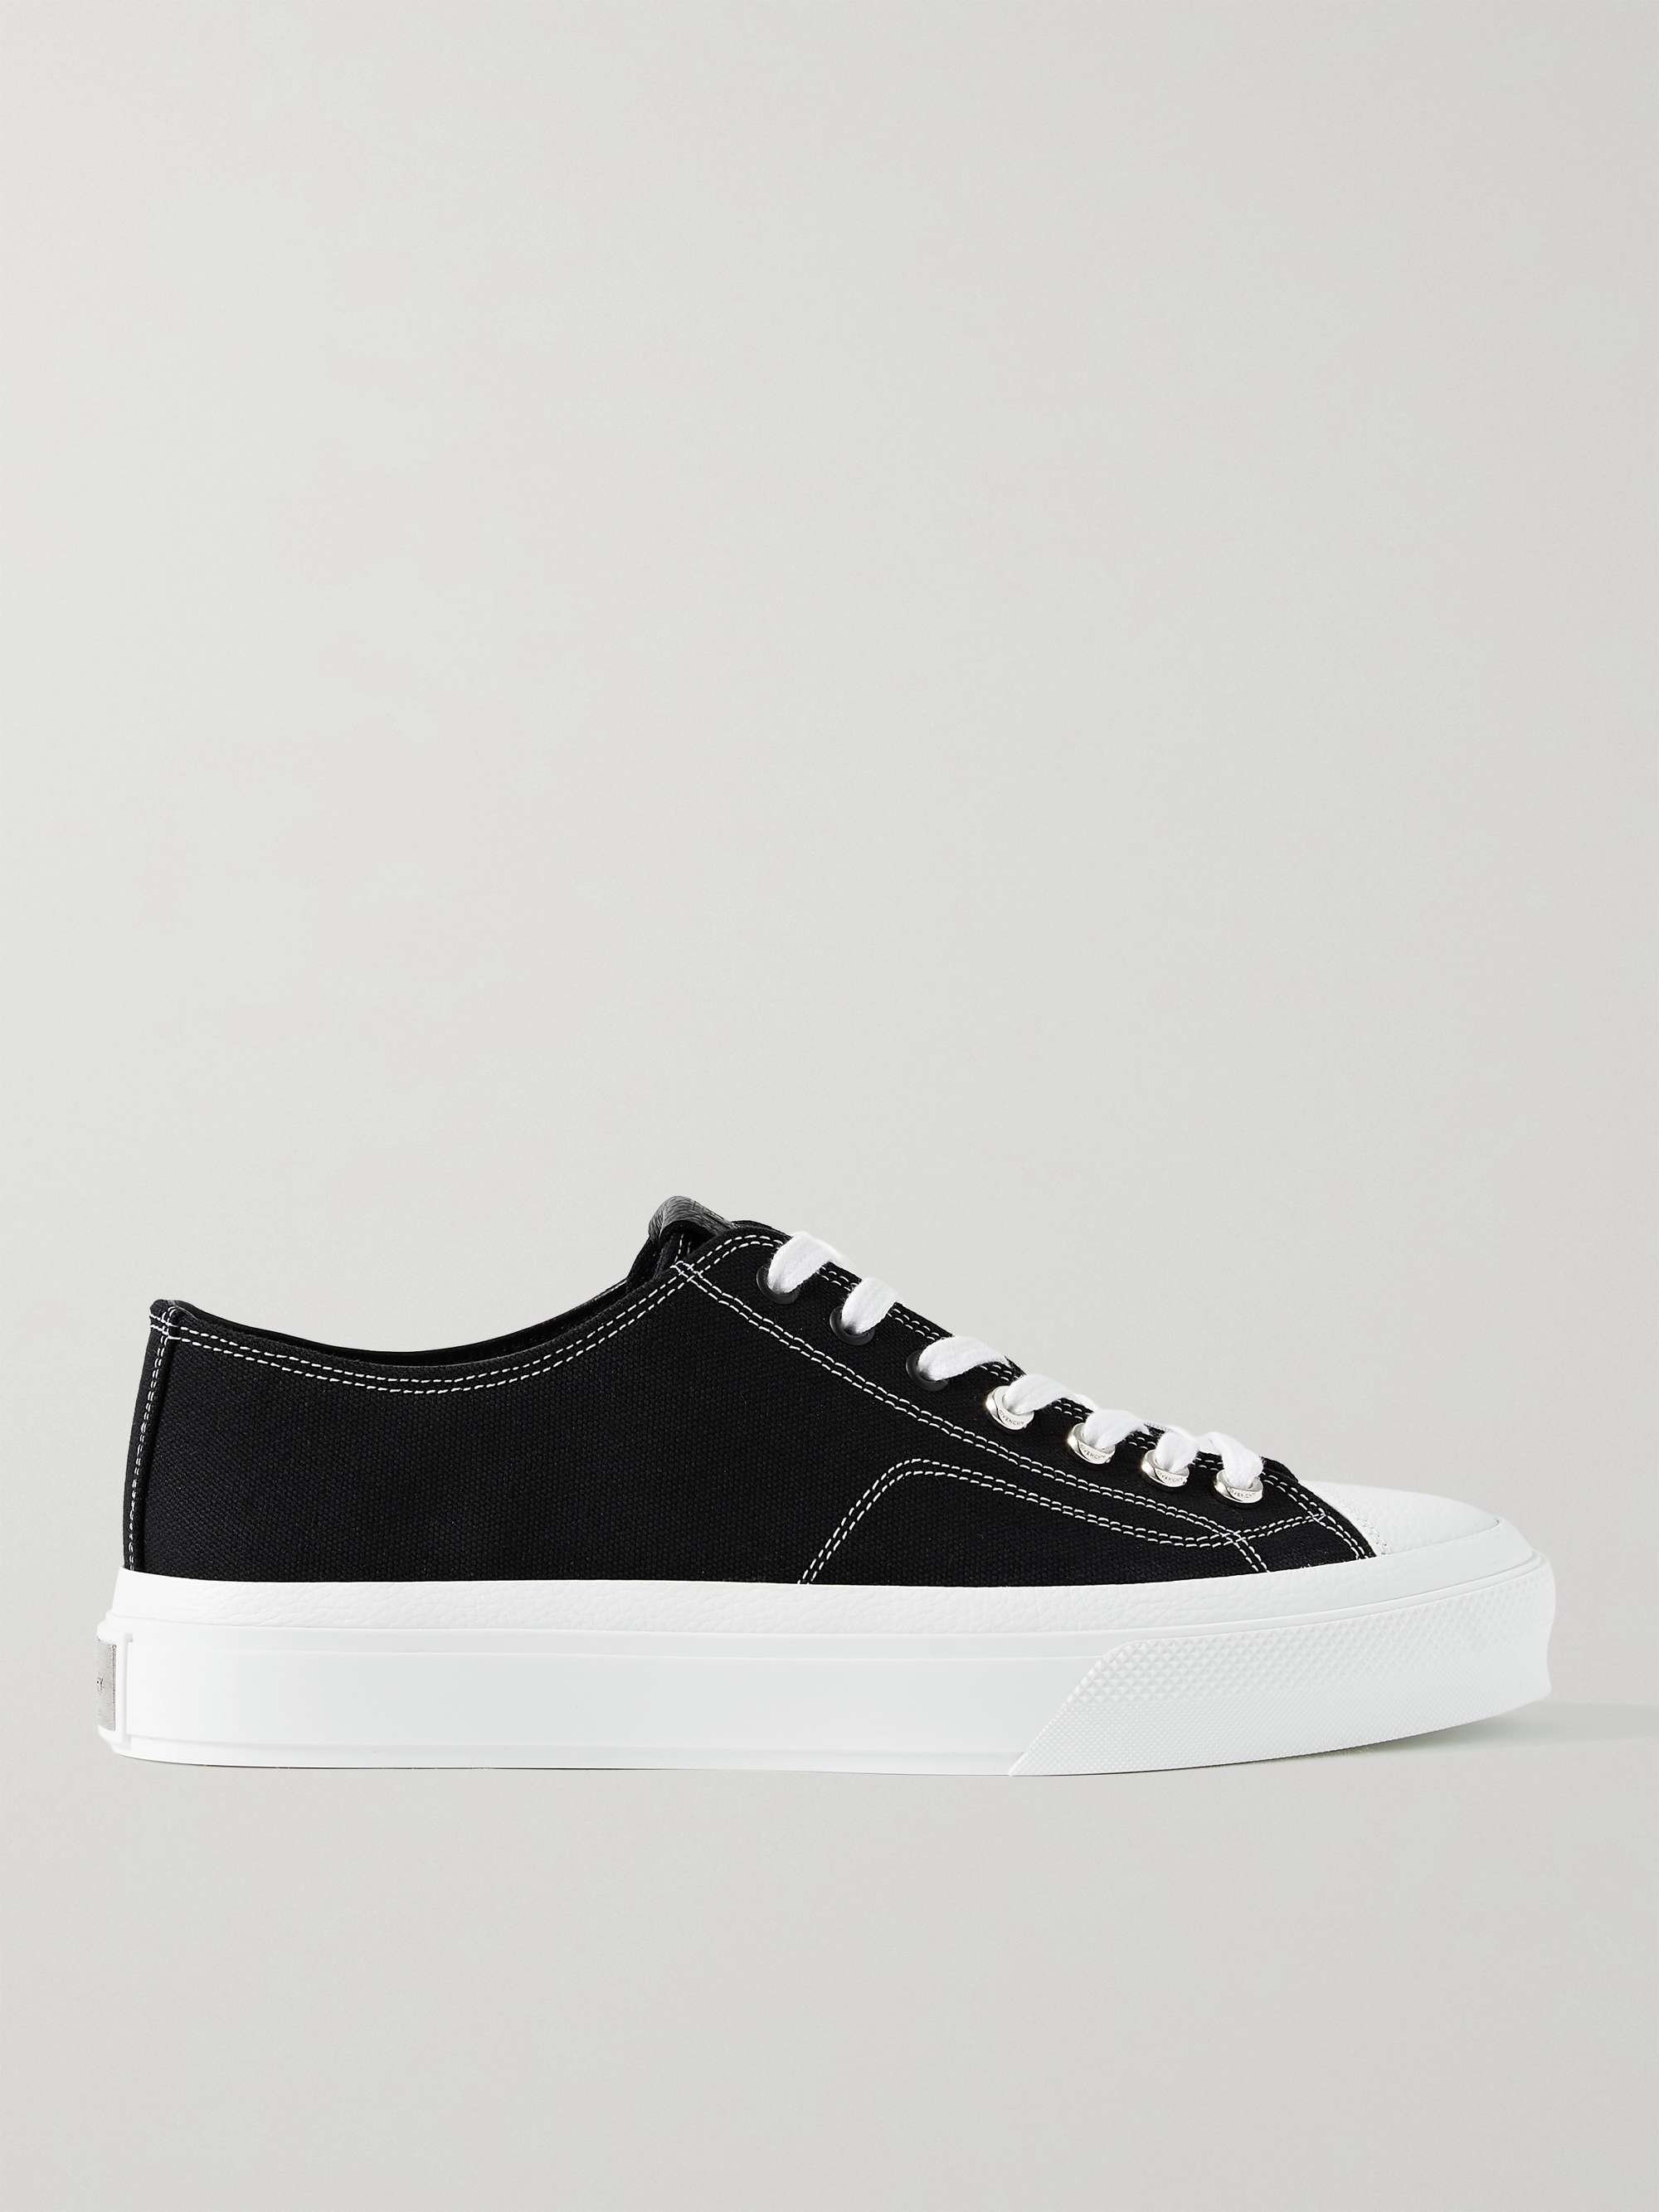 GIVENCHY Perforated Leather Sneakers | MR PORTER